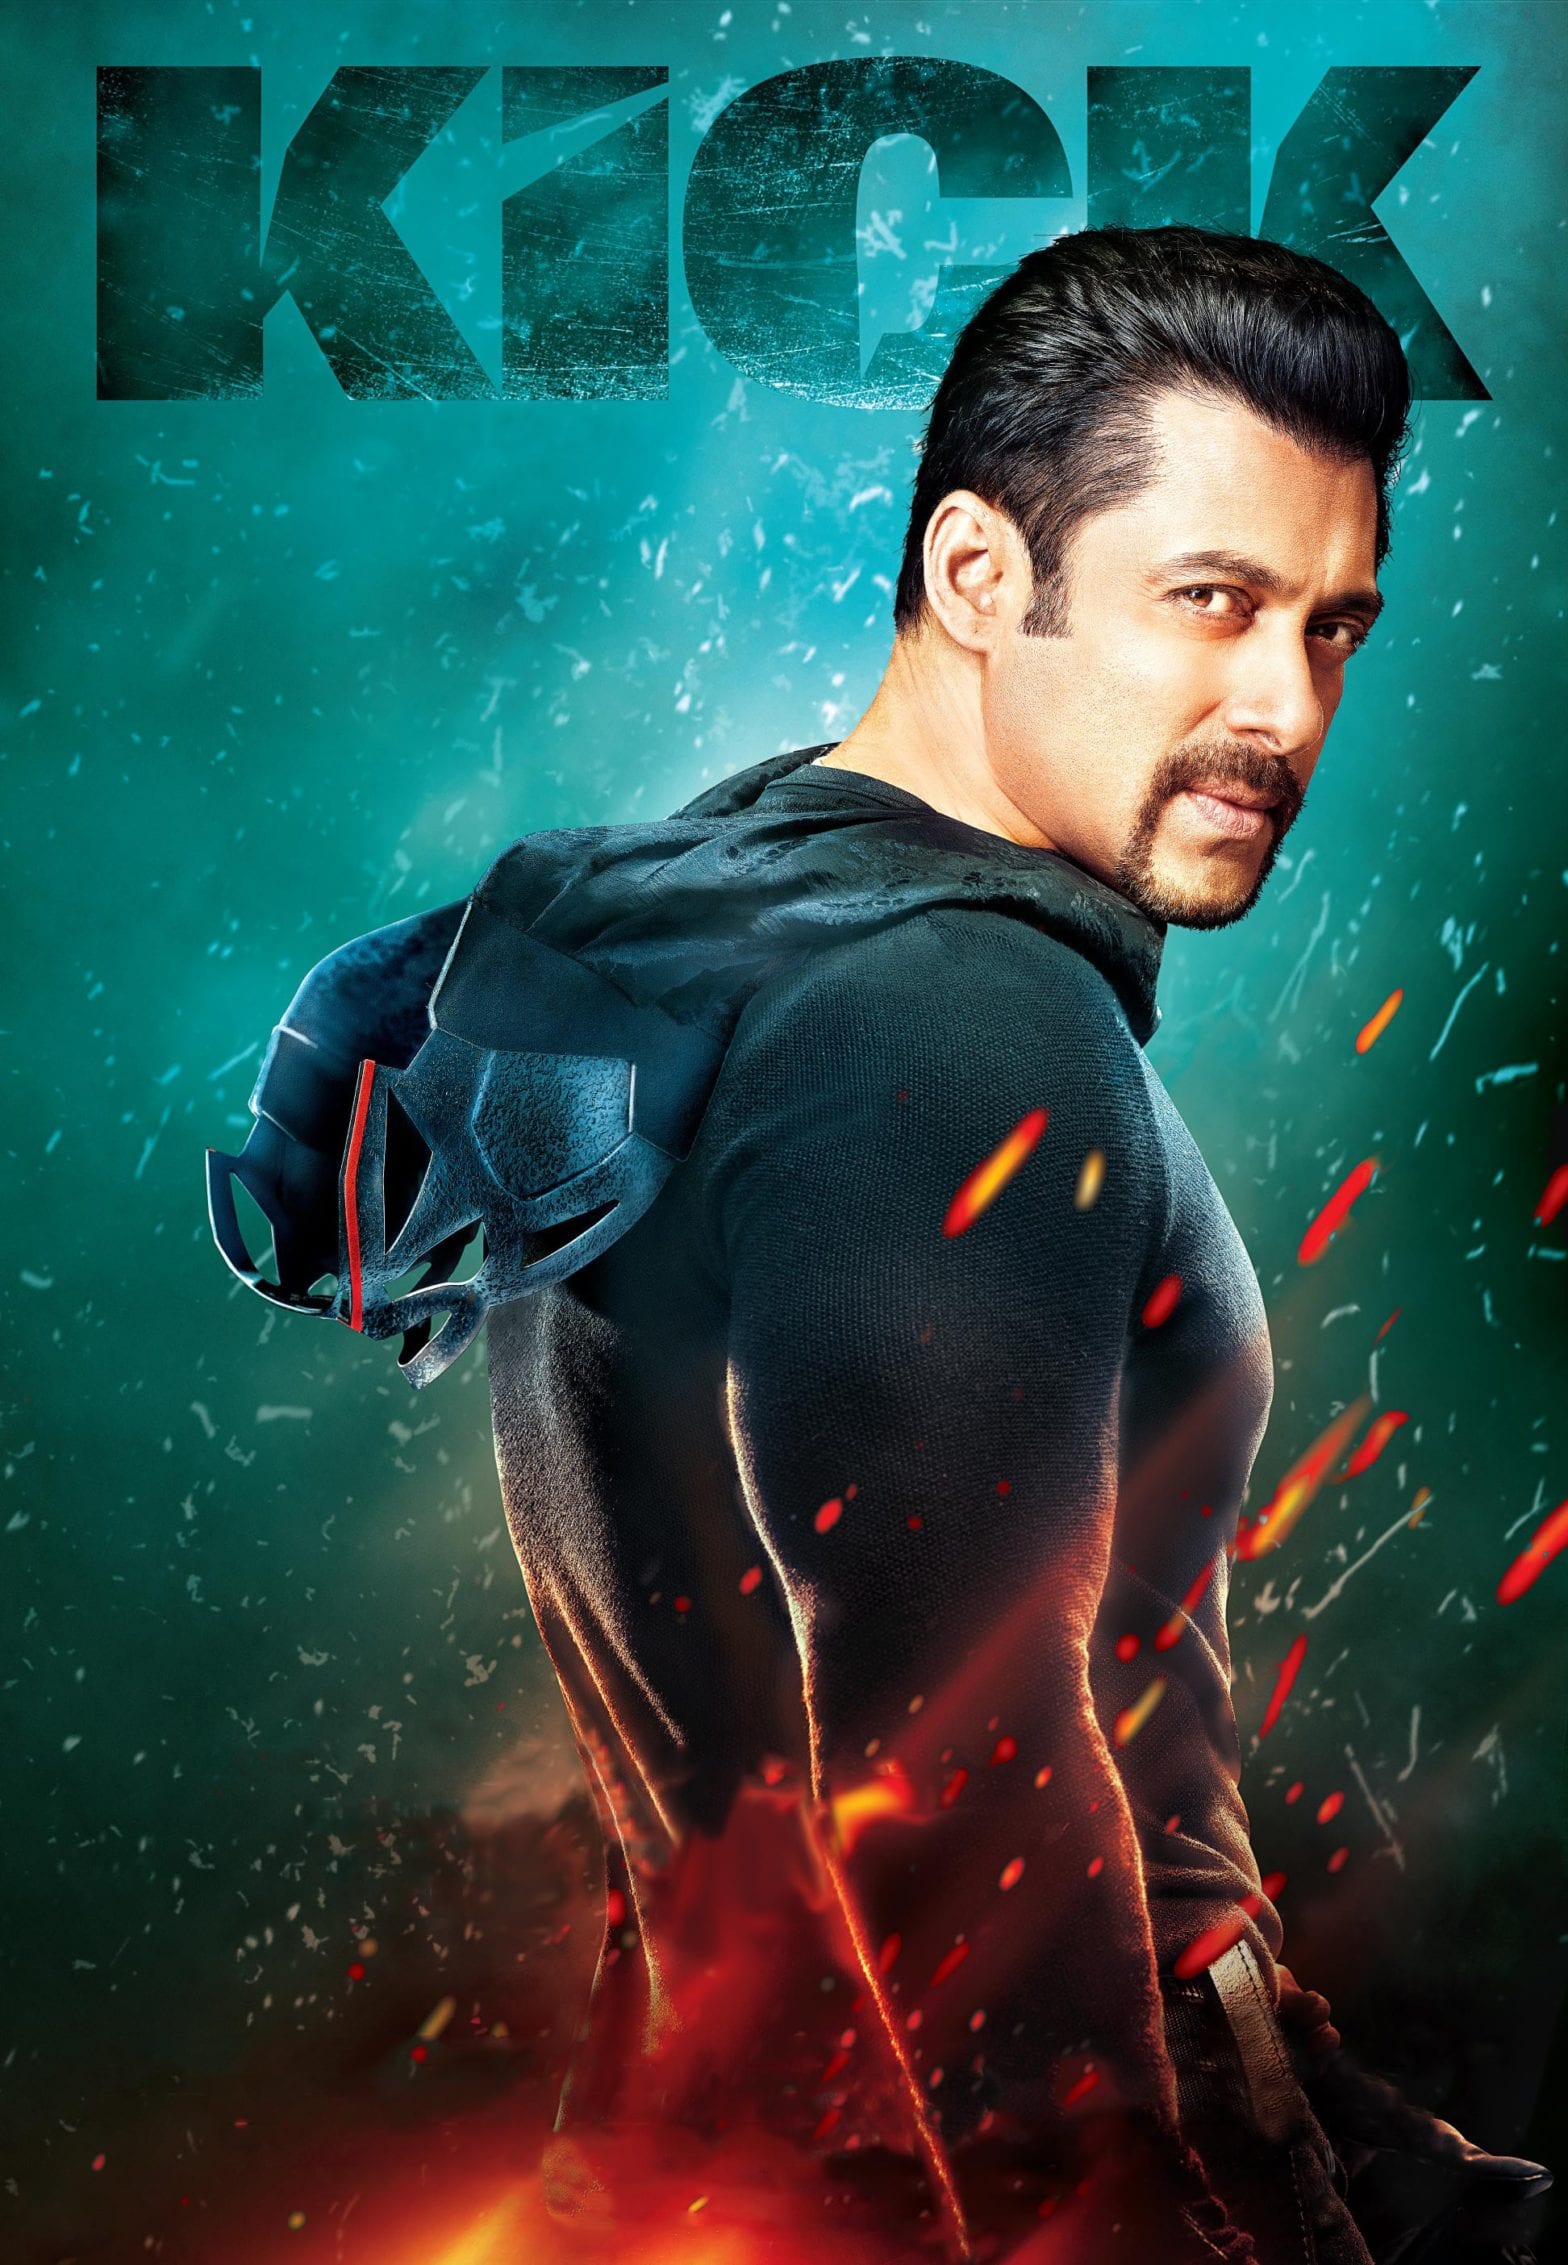 Poster for the movie "Kick"